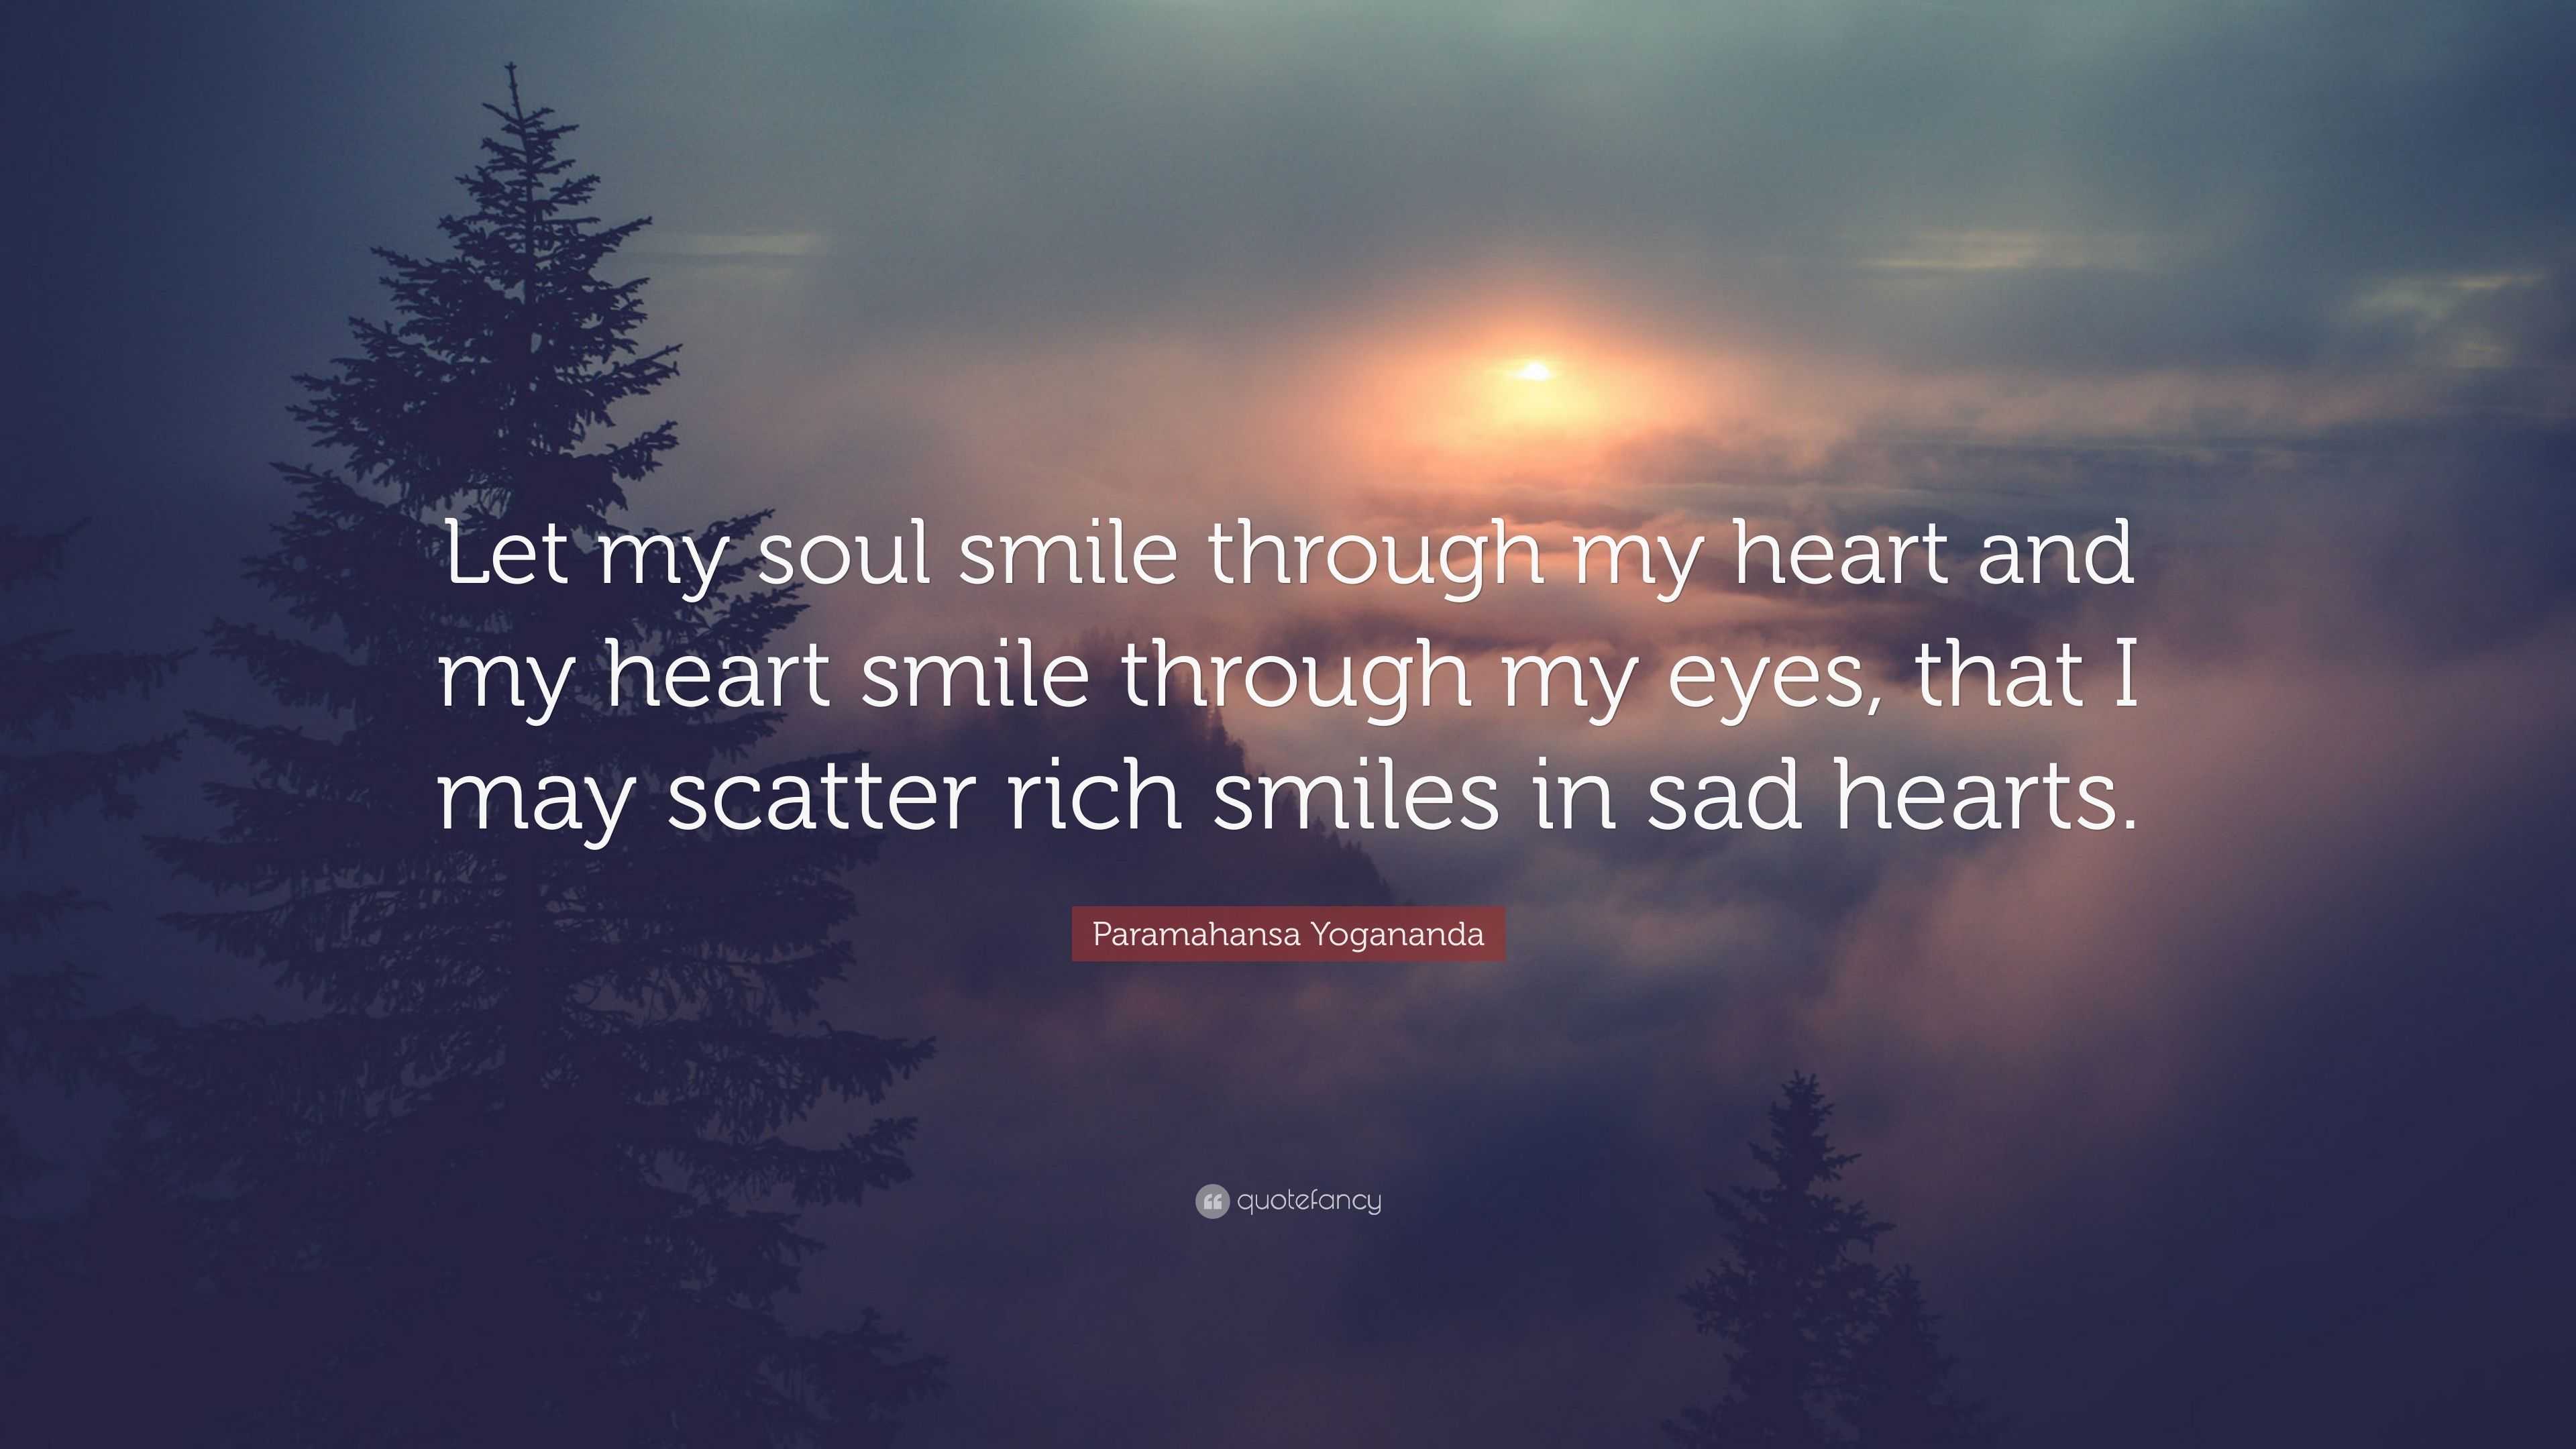 4682885 Paramahansa Yogananda Quote Let my soul smile through my heart and